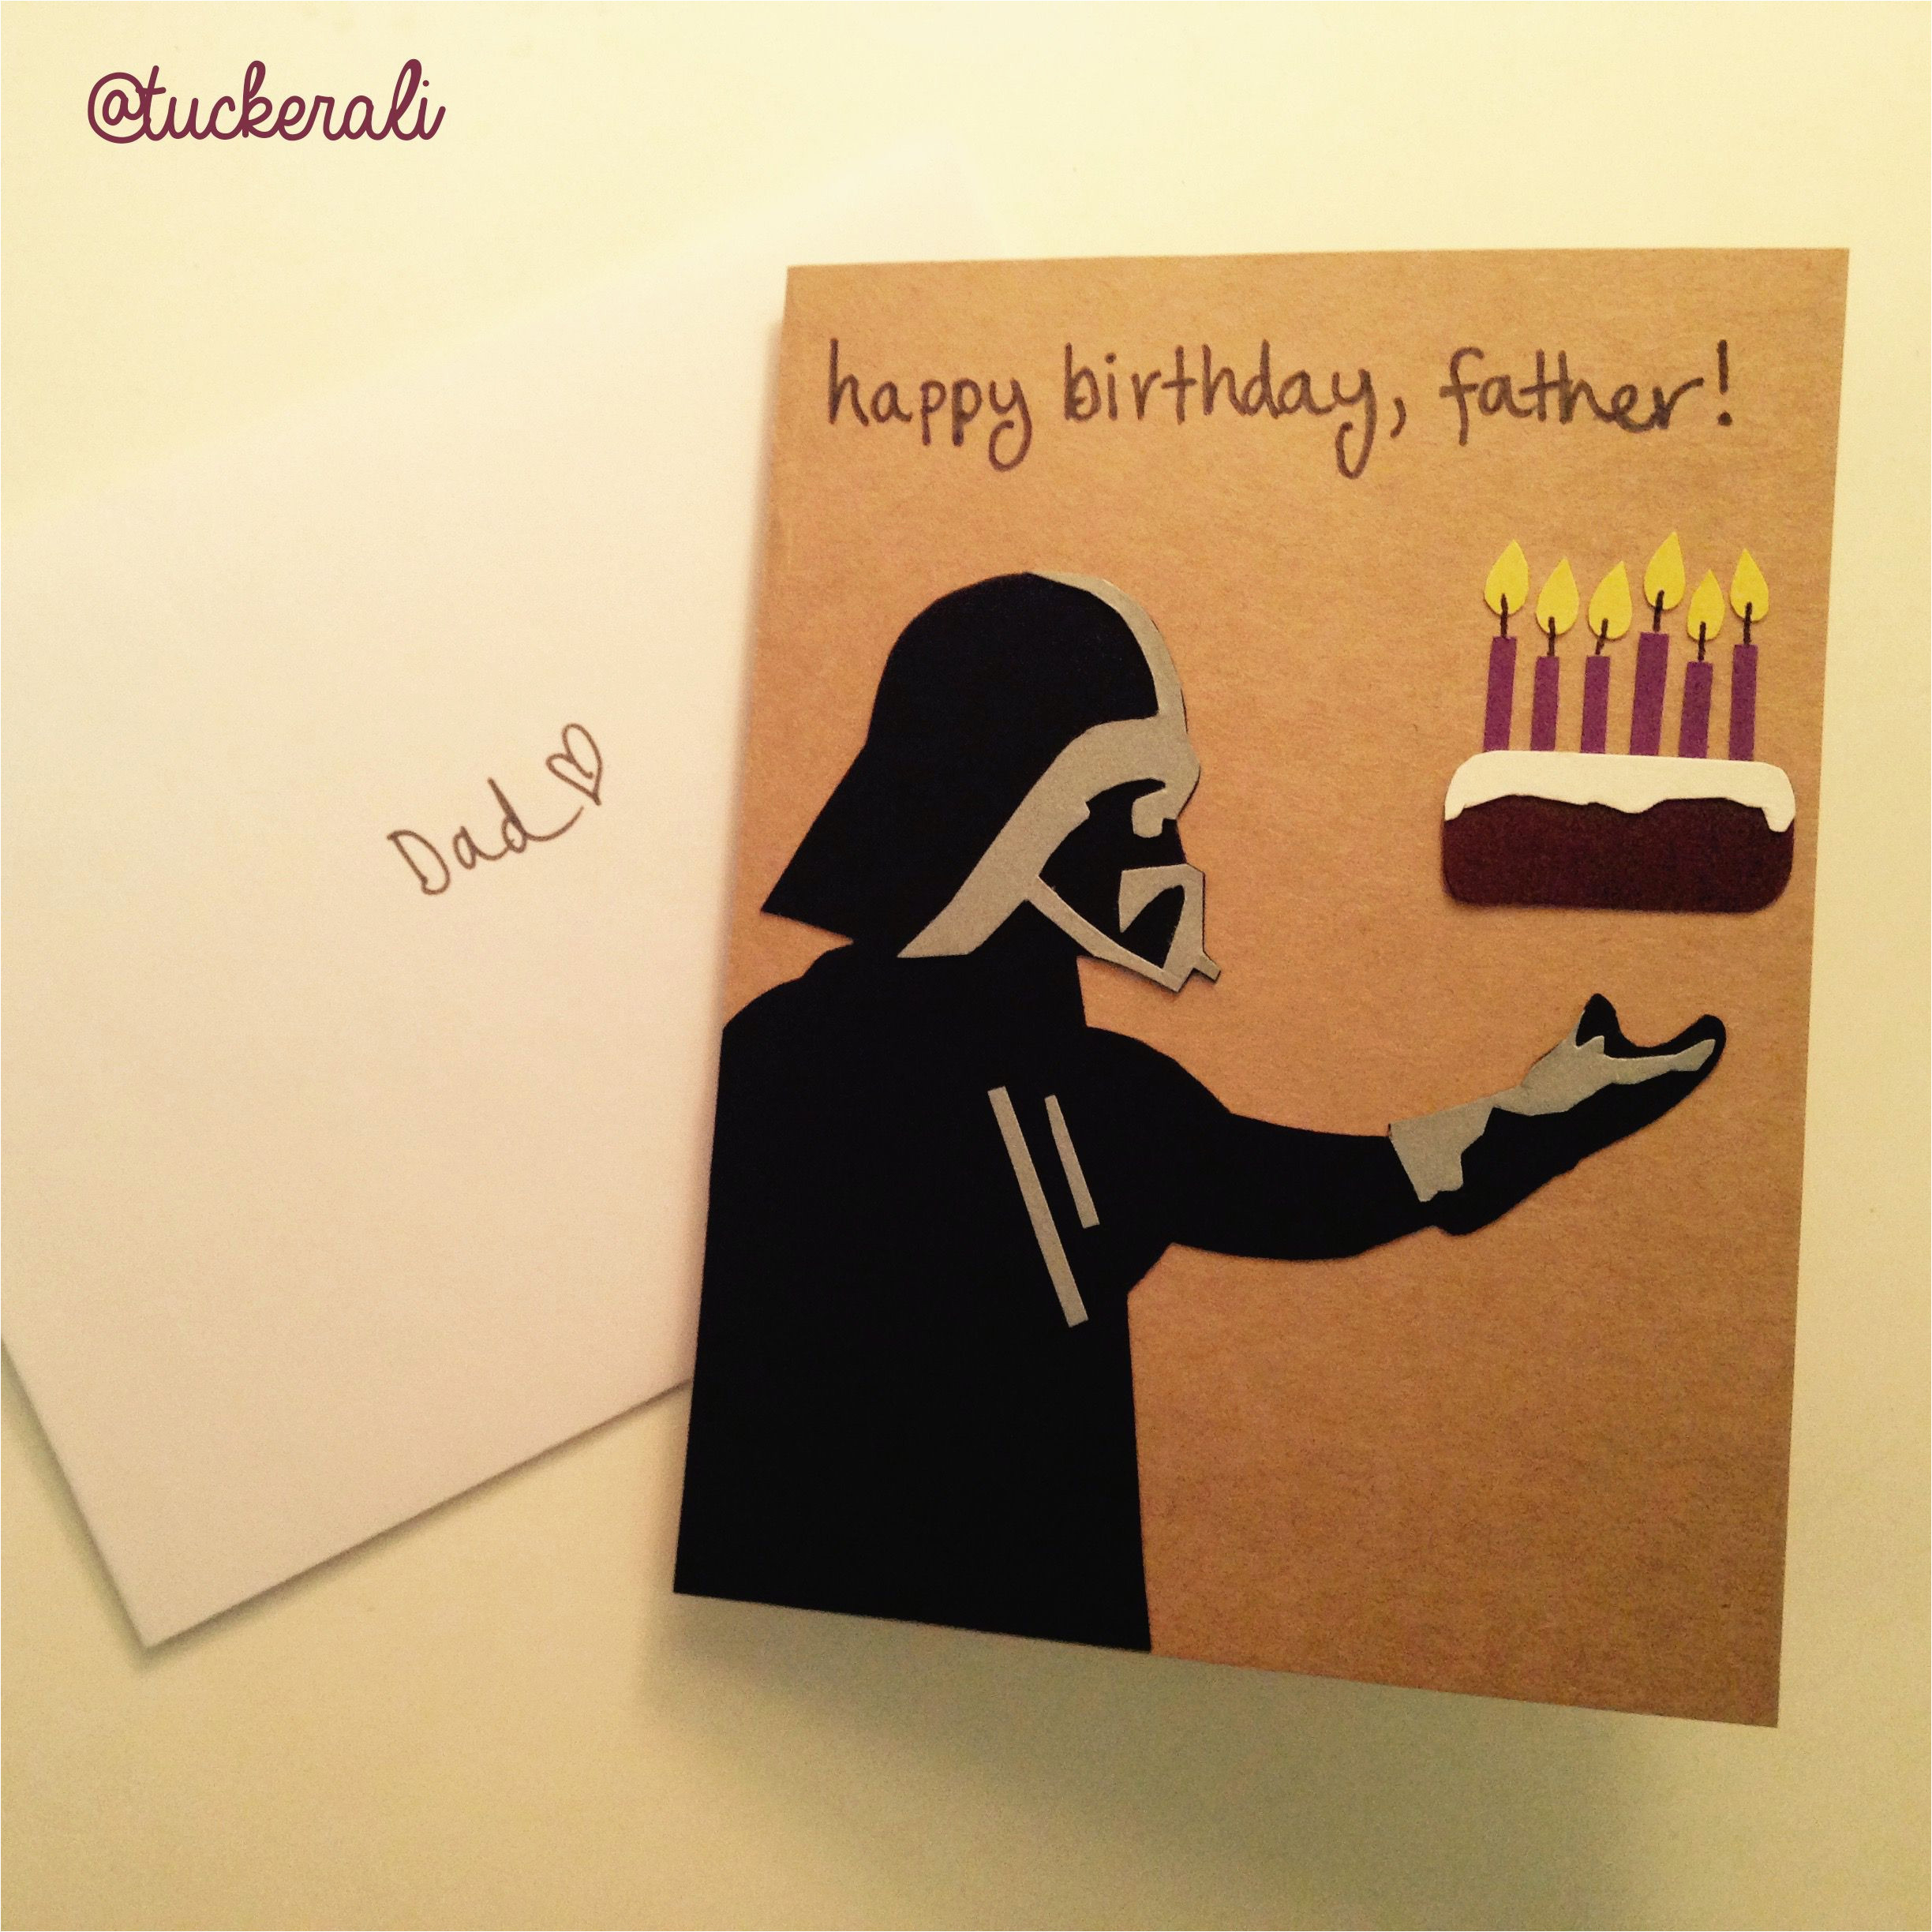 Cute Birthday Card Ideas For Dad Diy Birthday Cards For Your Dad 911stories